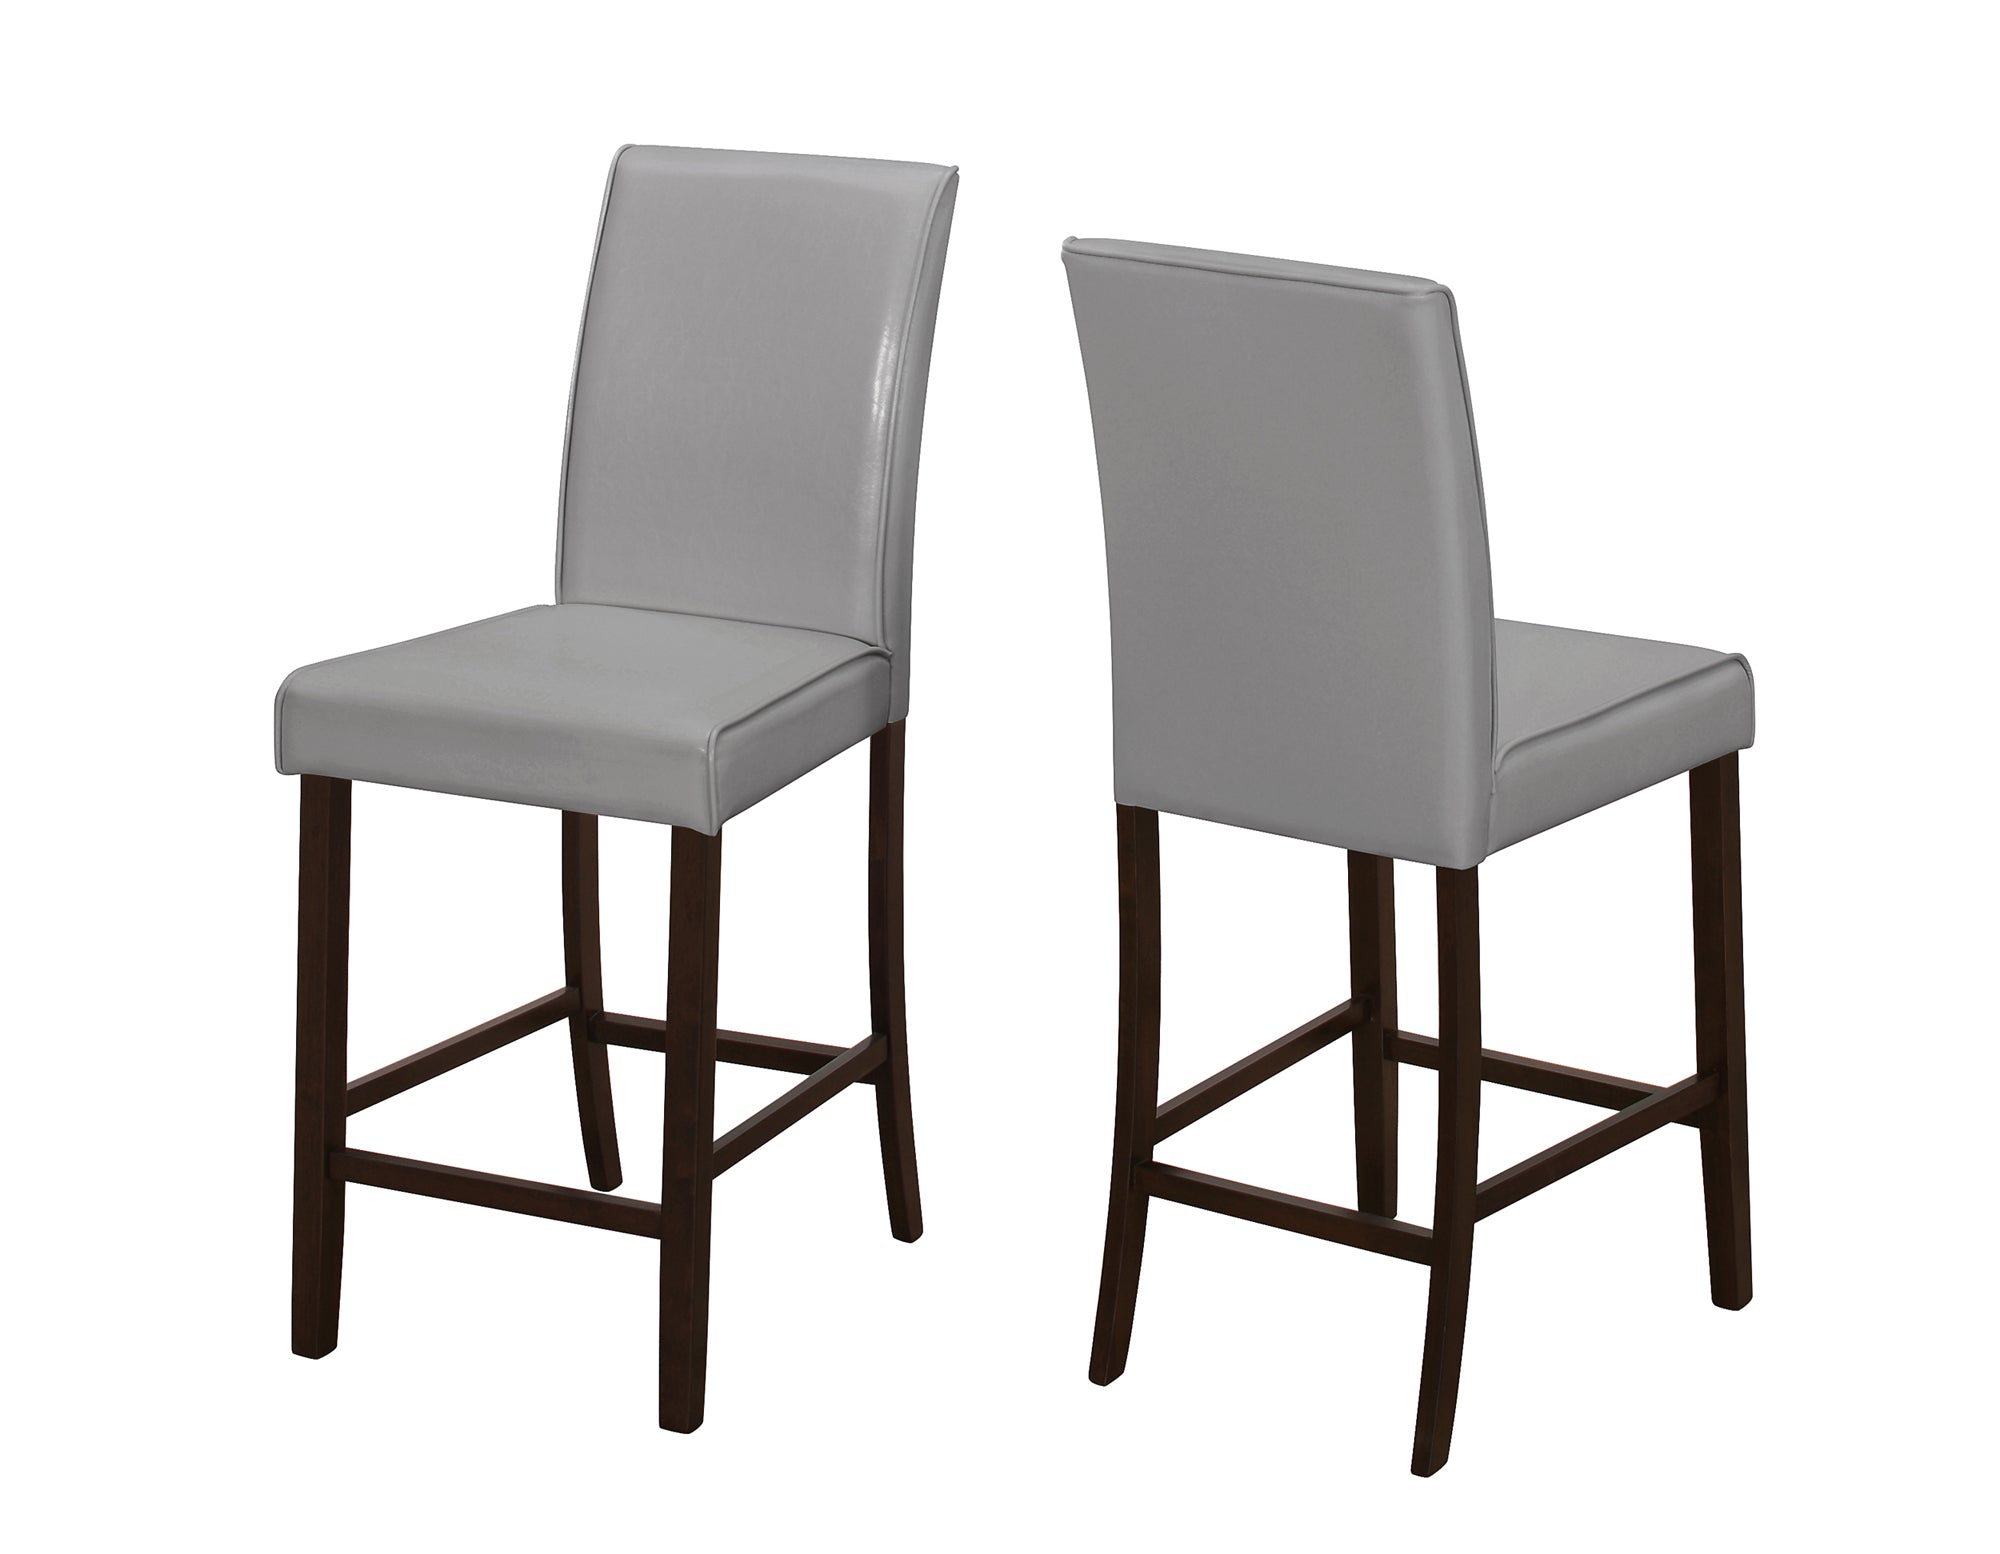 MN-421902    Dining Chair, Set Of 2, Counter Height, Pu Leather-Look, Upholstered, Wood Legs, Kitchen, Leather Look, Wooden Legs, Grey, Dark Brown, Contemporary, Modern